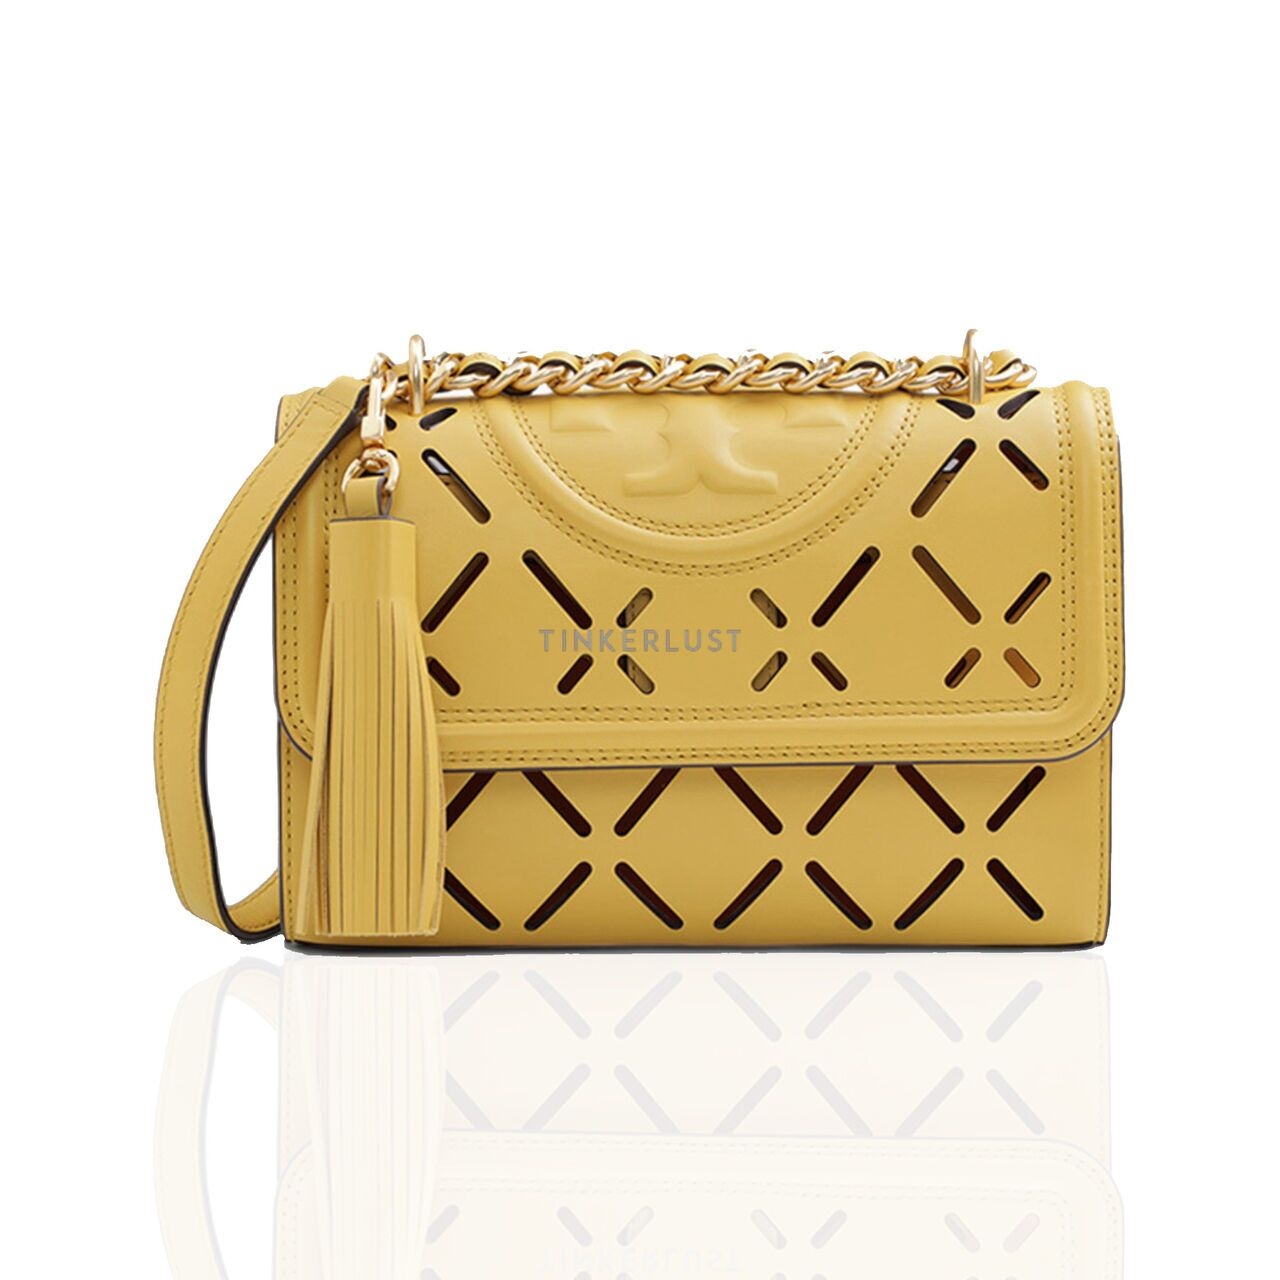 Tory Burch Small Fleming Diamond Perforated Convertible in Golden Sunset/Orange Citrine Shoulder Bag 